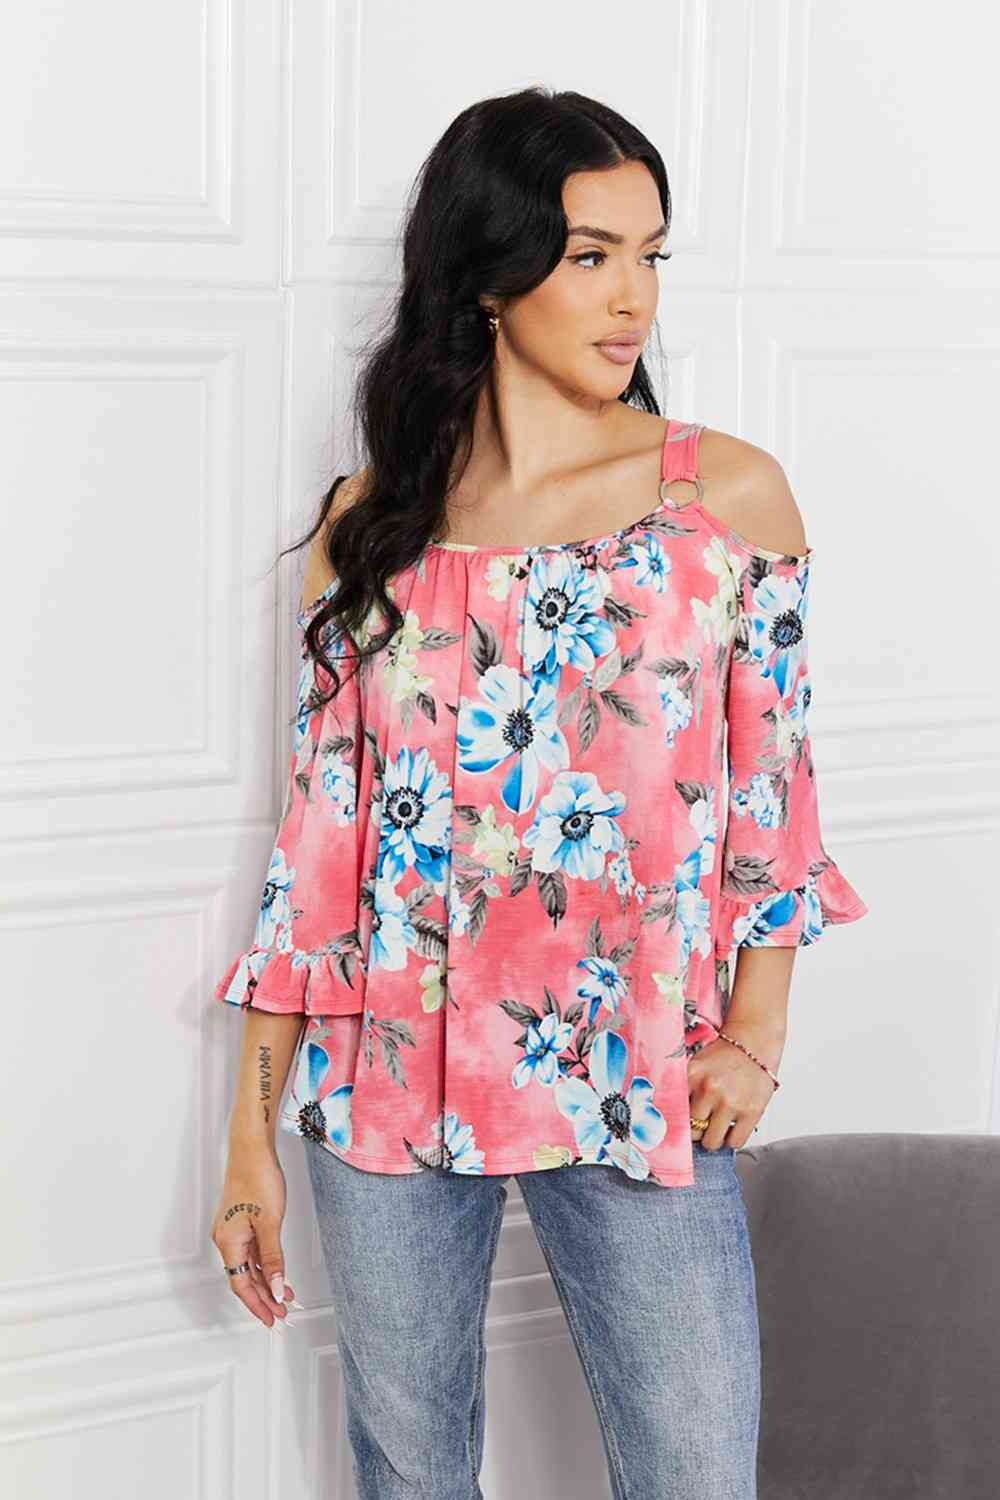 Fresh Take Floral Cold-Shoulder Top - Women’s Clothing & Accessories - Shirts & Tops - 6 - 2024